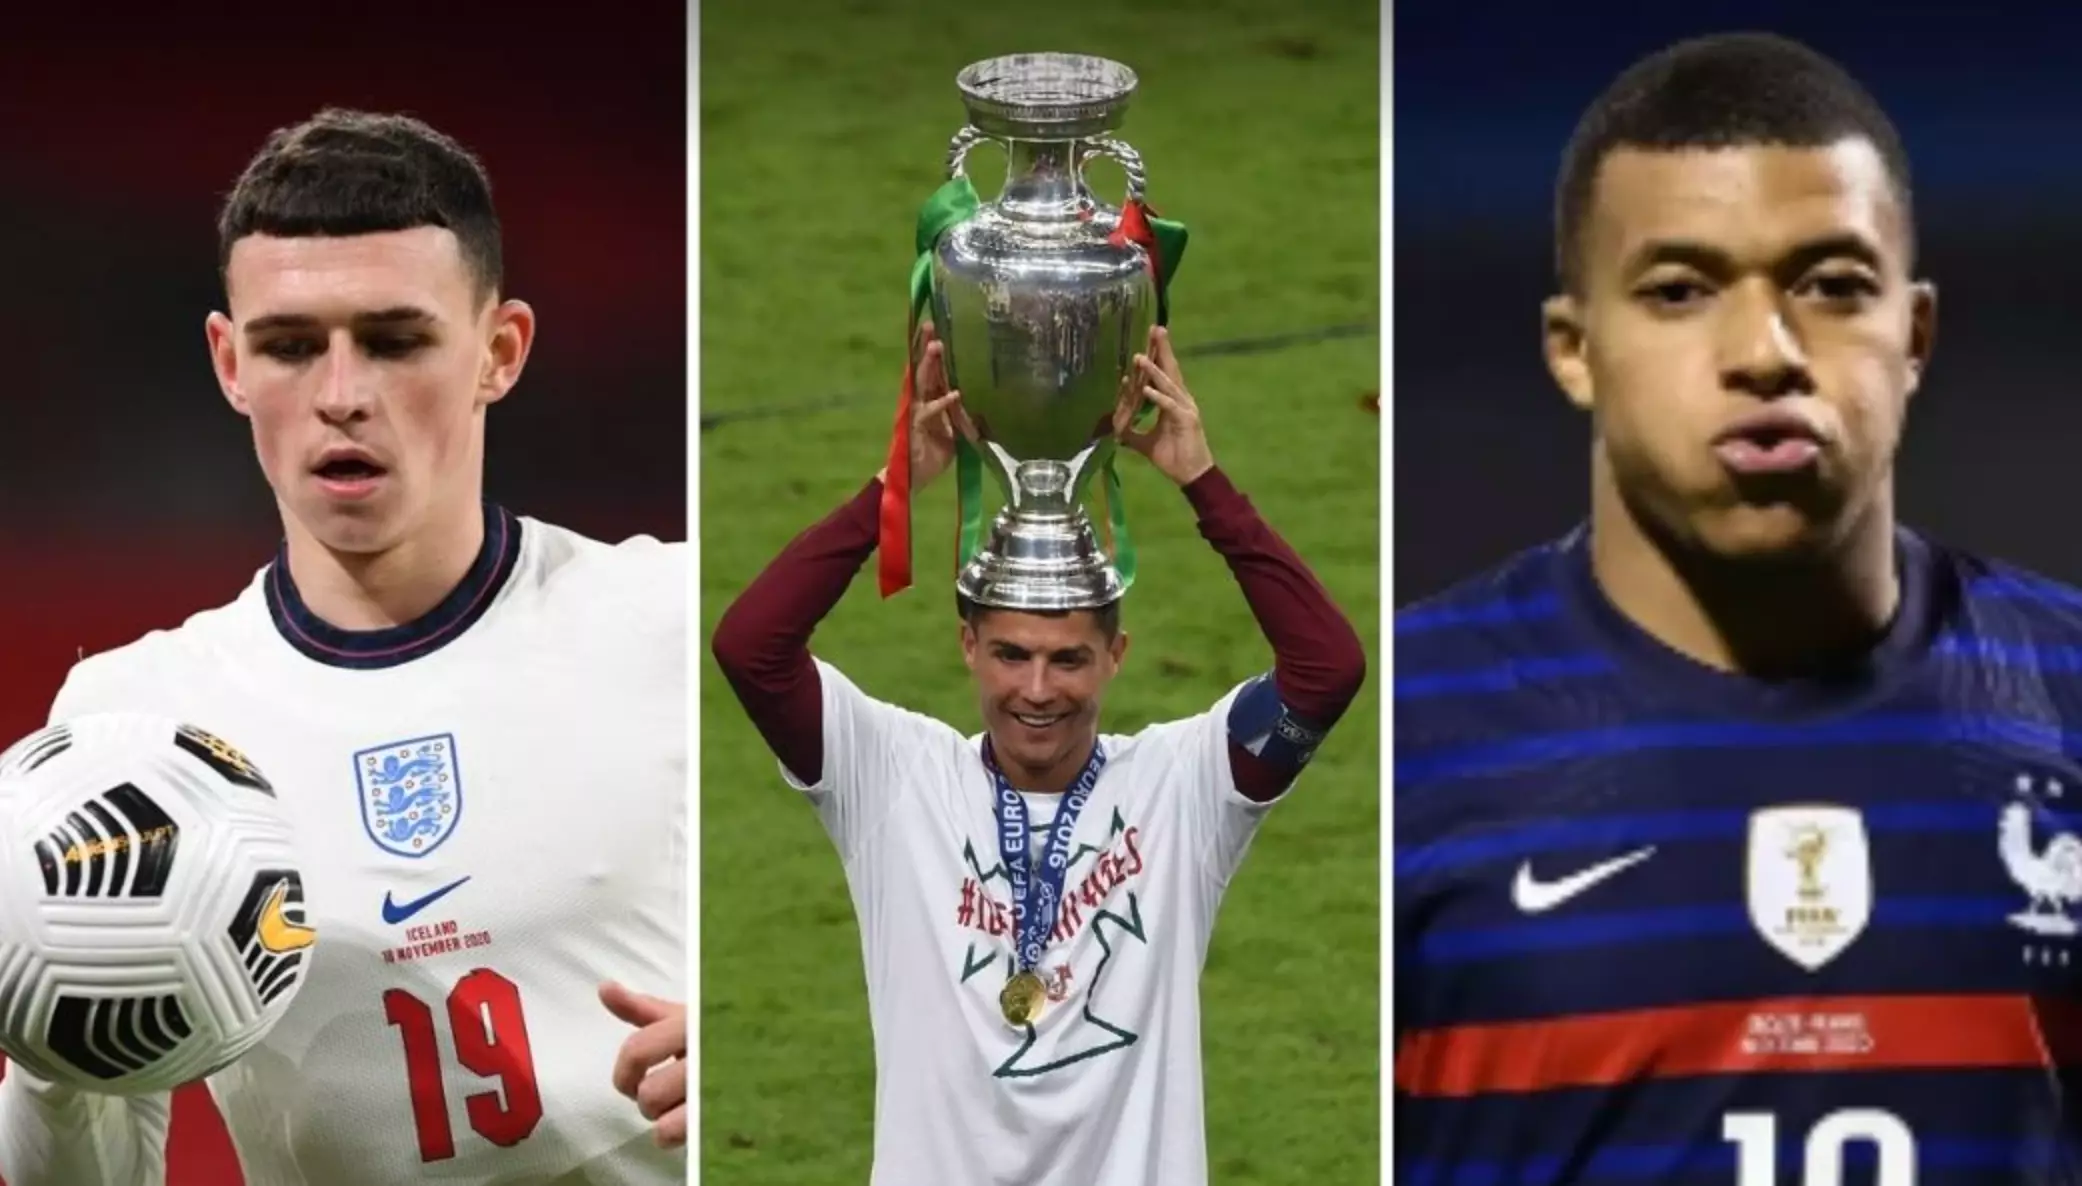 The Ultimate Euro 2020 Betting Guide: From Winner To Top Scorer